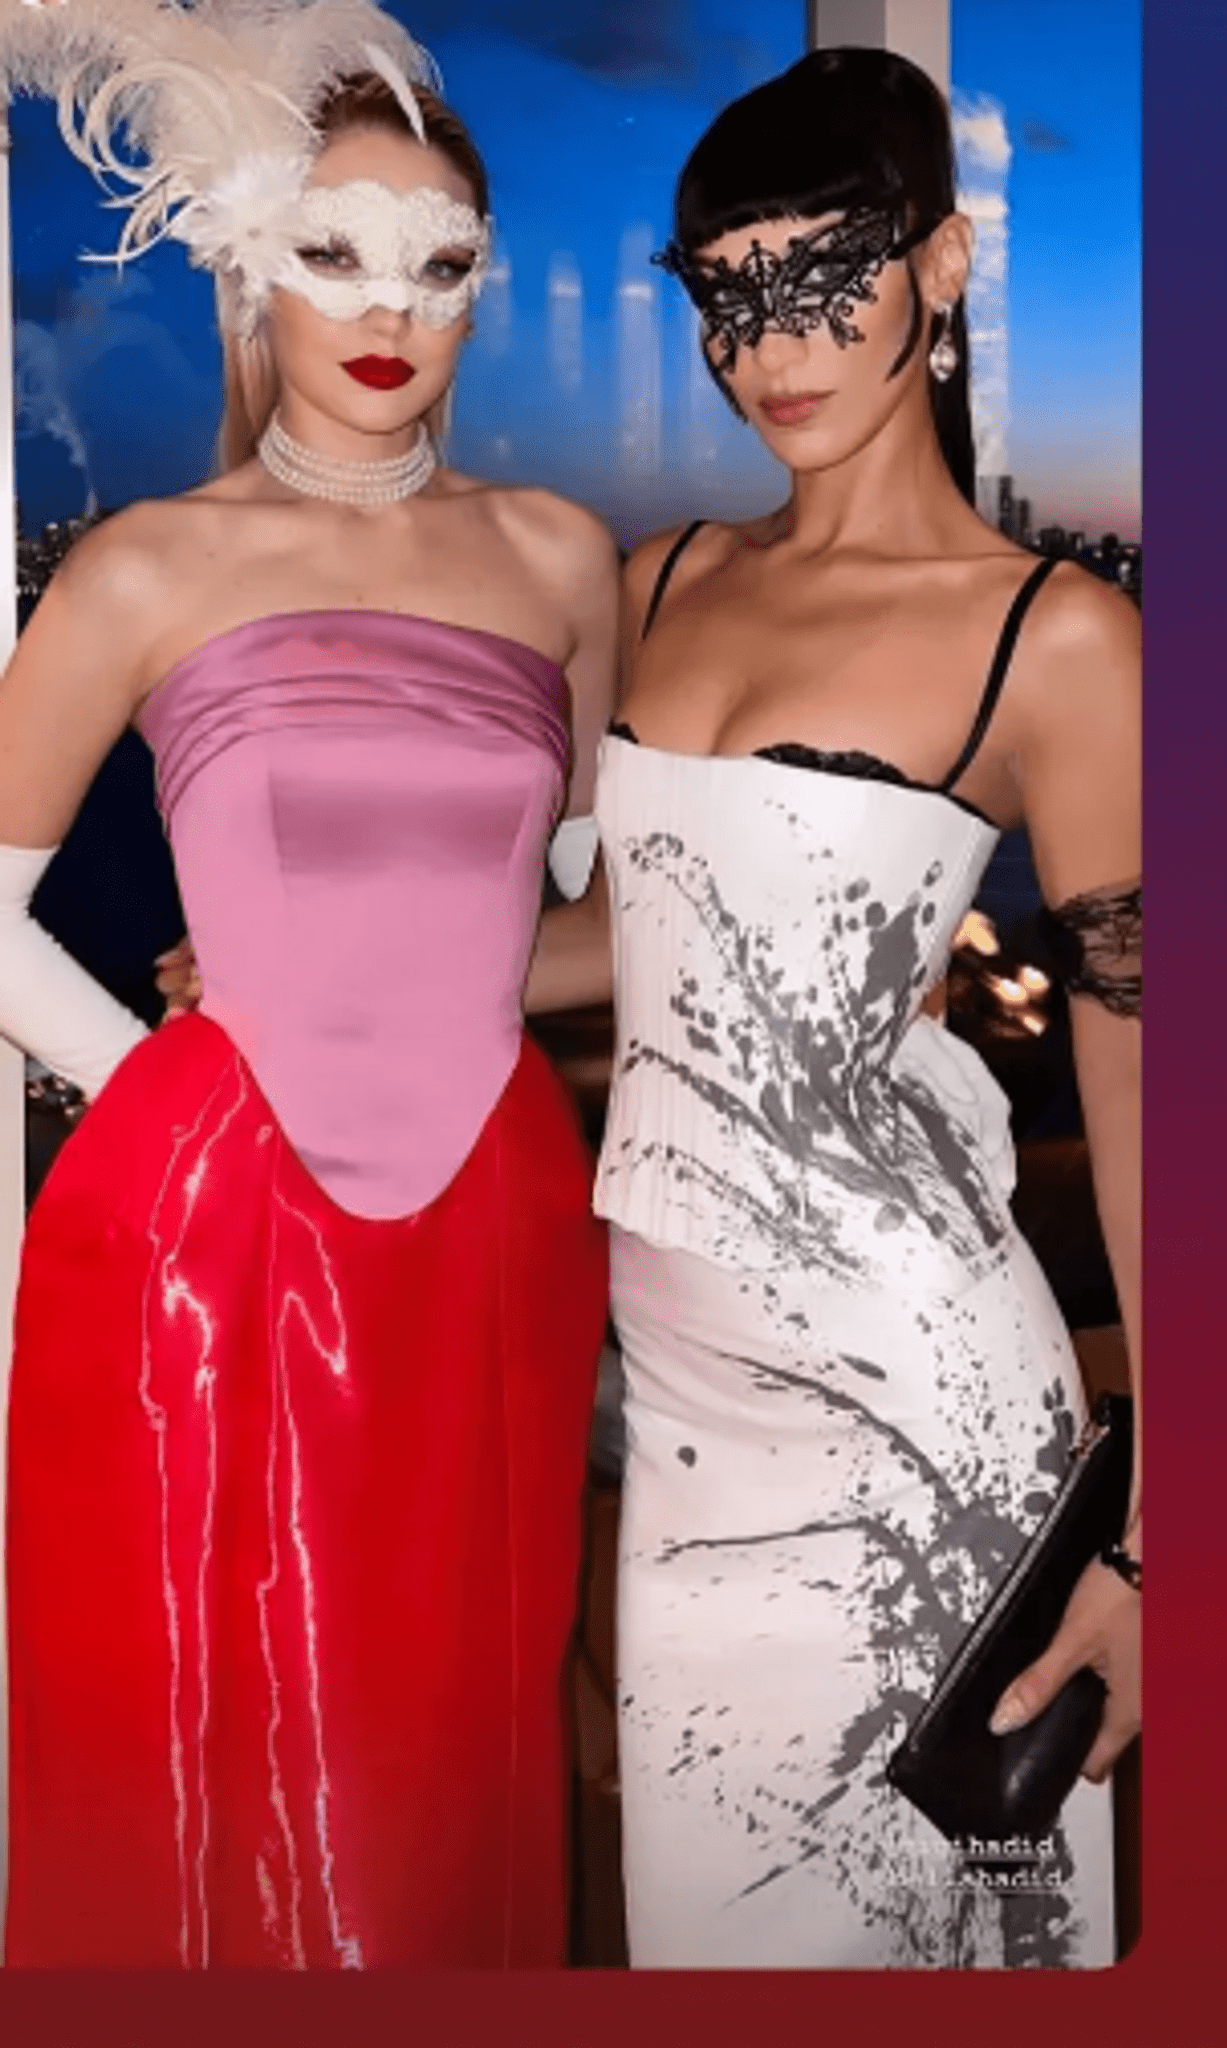 sisters-hadid-in-an-extraordinary-outfit-went-to-a-costume-party